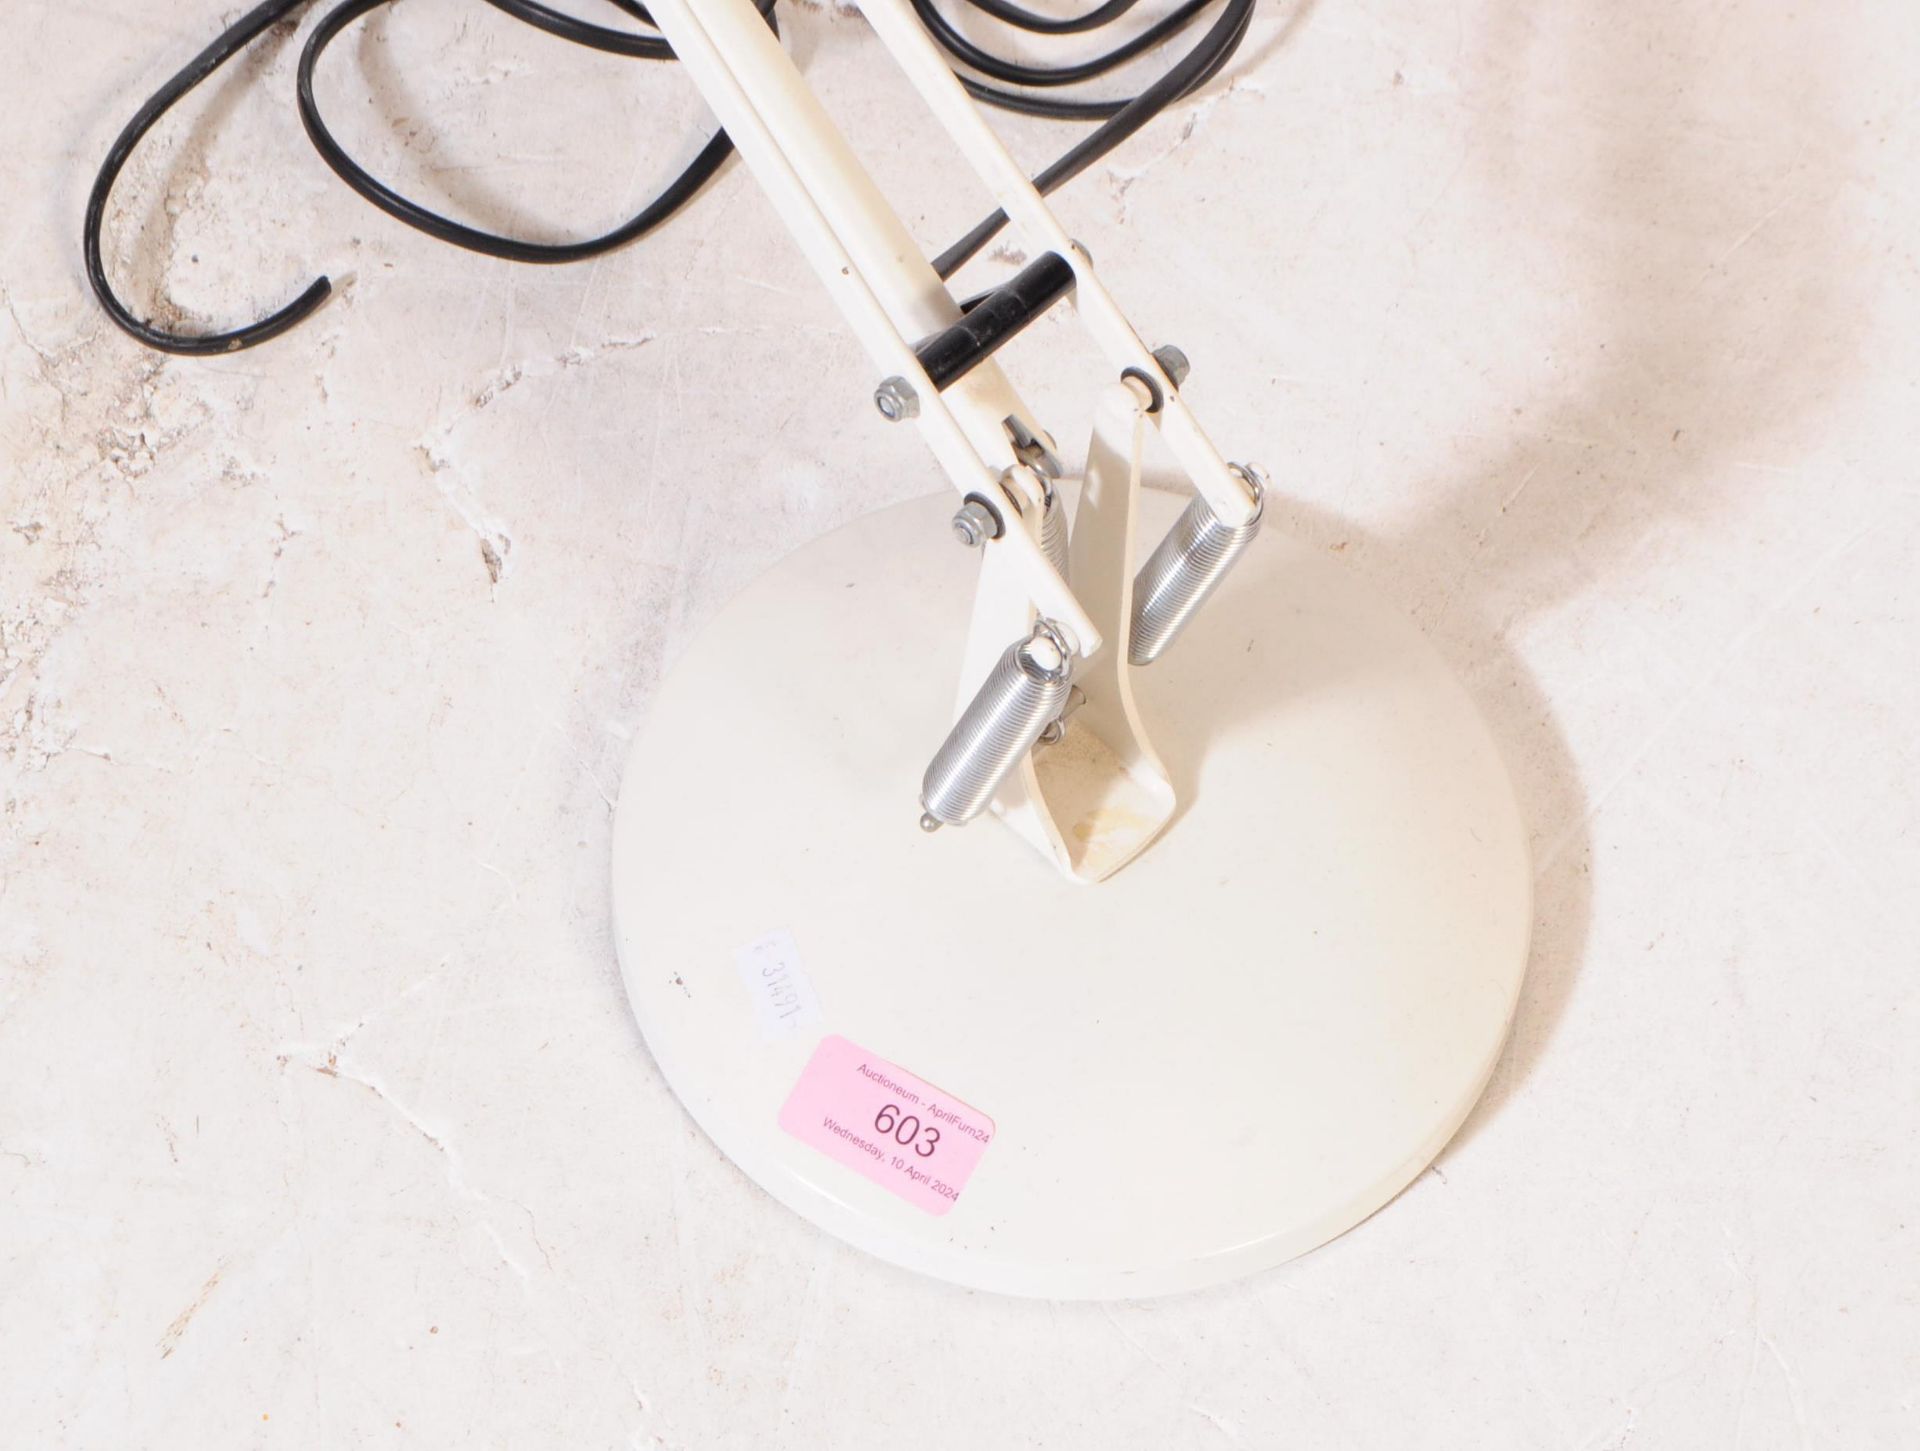 HERBERT TERRY - MID 20TH CENTURY ANGLEPOISE DESK LAMP - Image 3 of 4